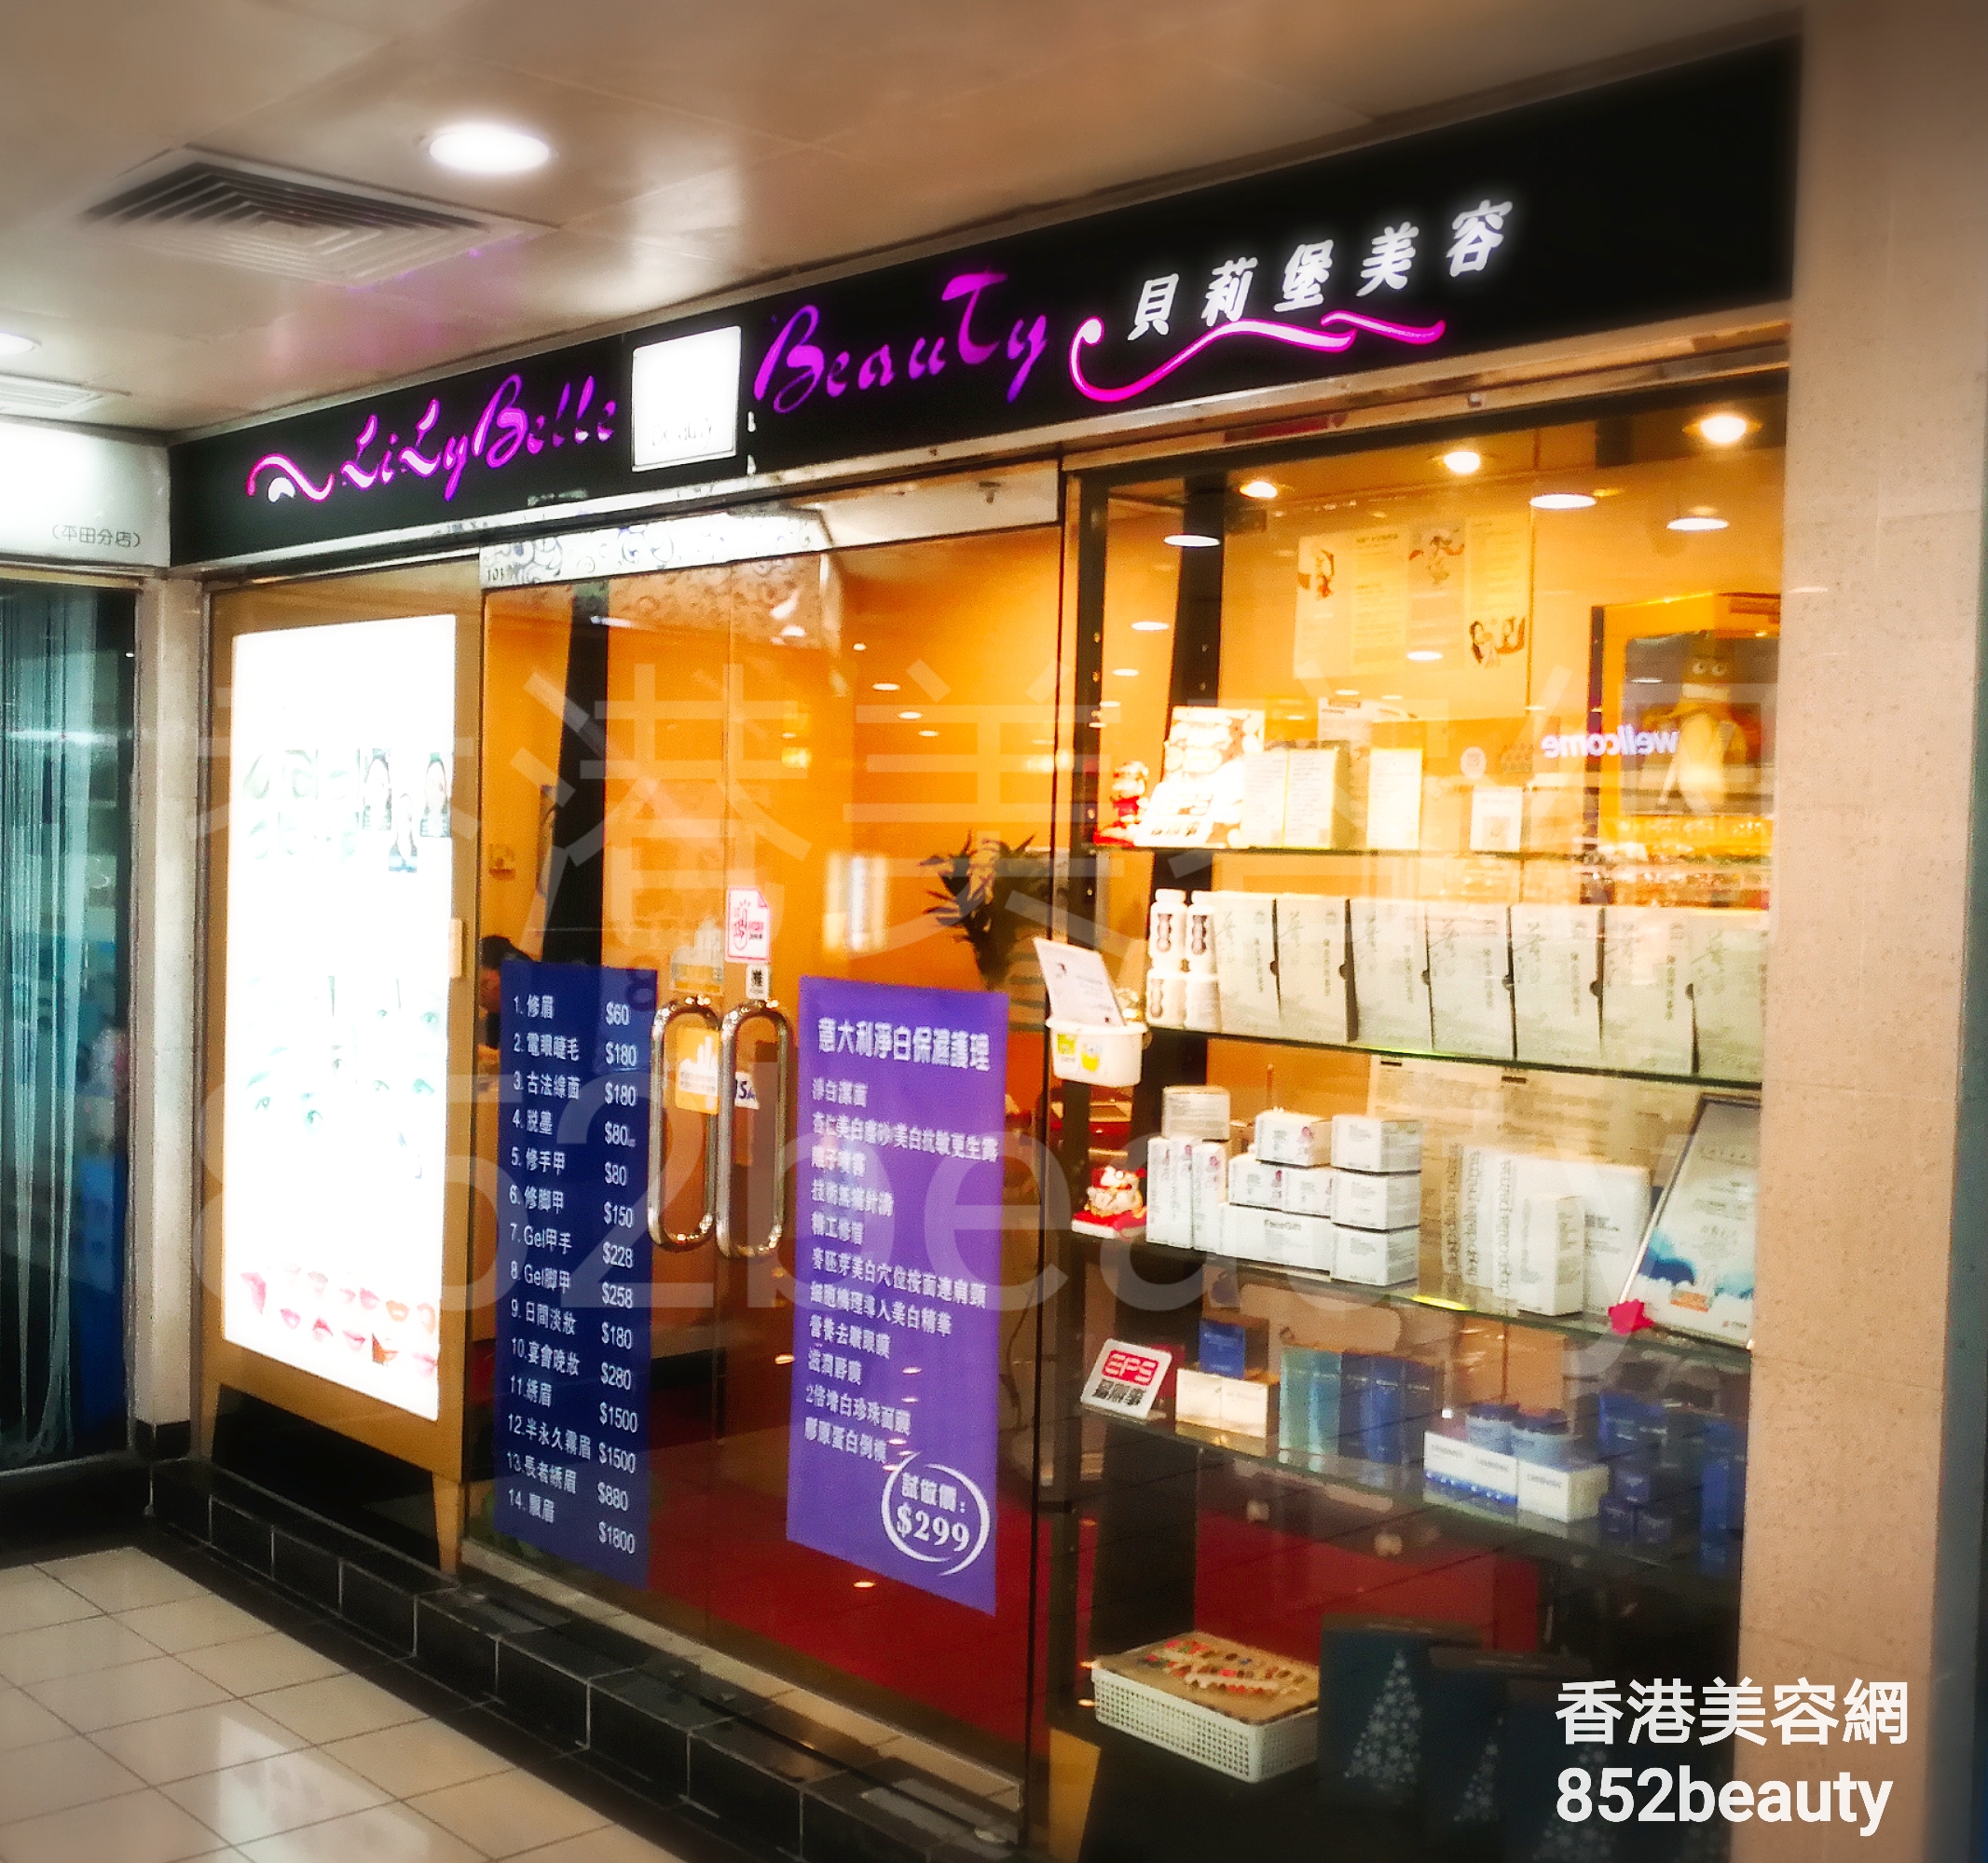 Hand and foot care: 貝莉堡美容